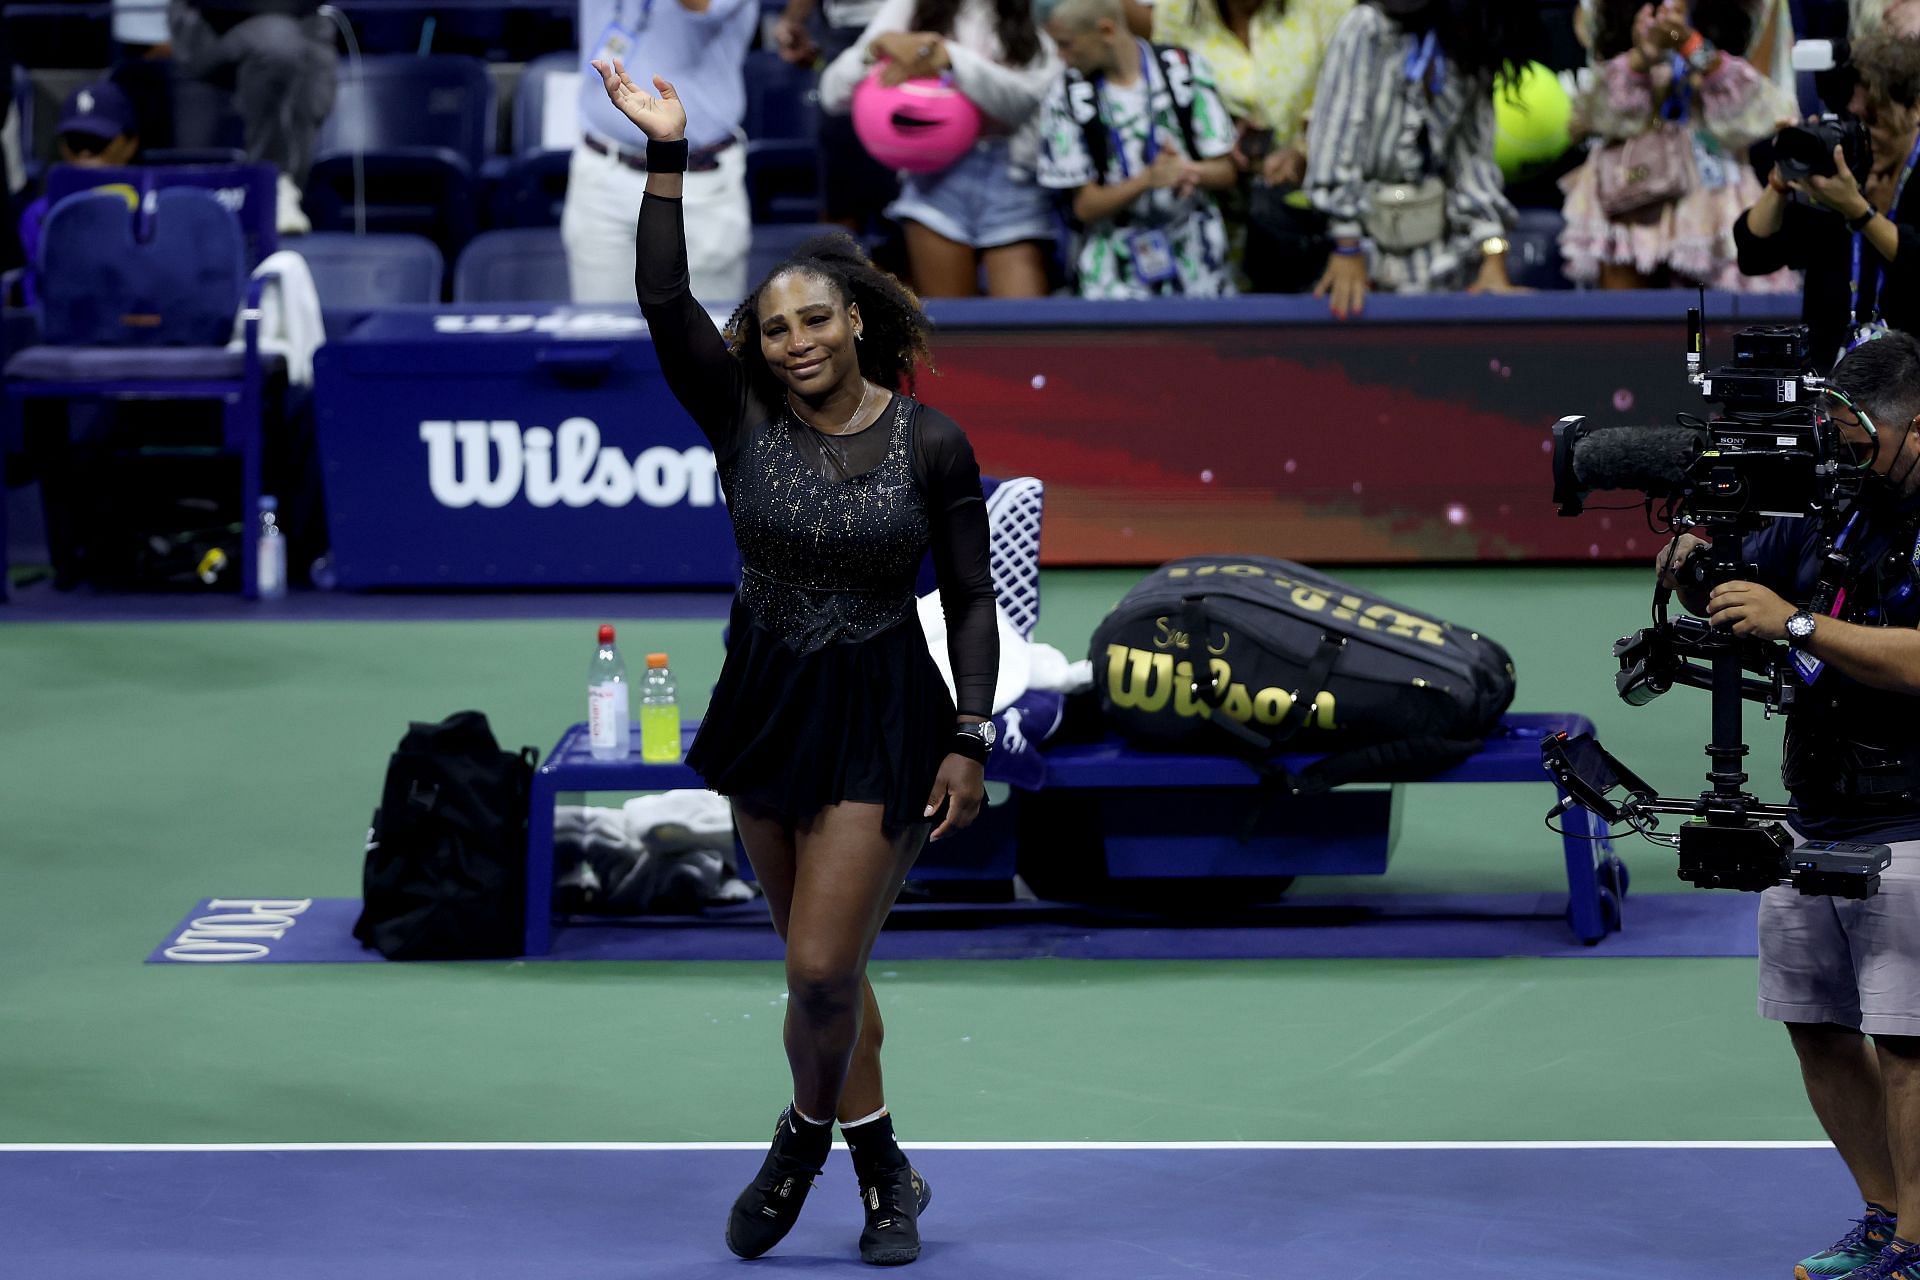 Serena Williams has many Major records to her name after an illustrious career.